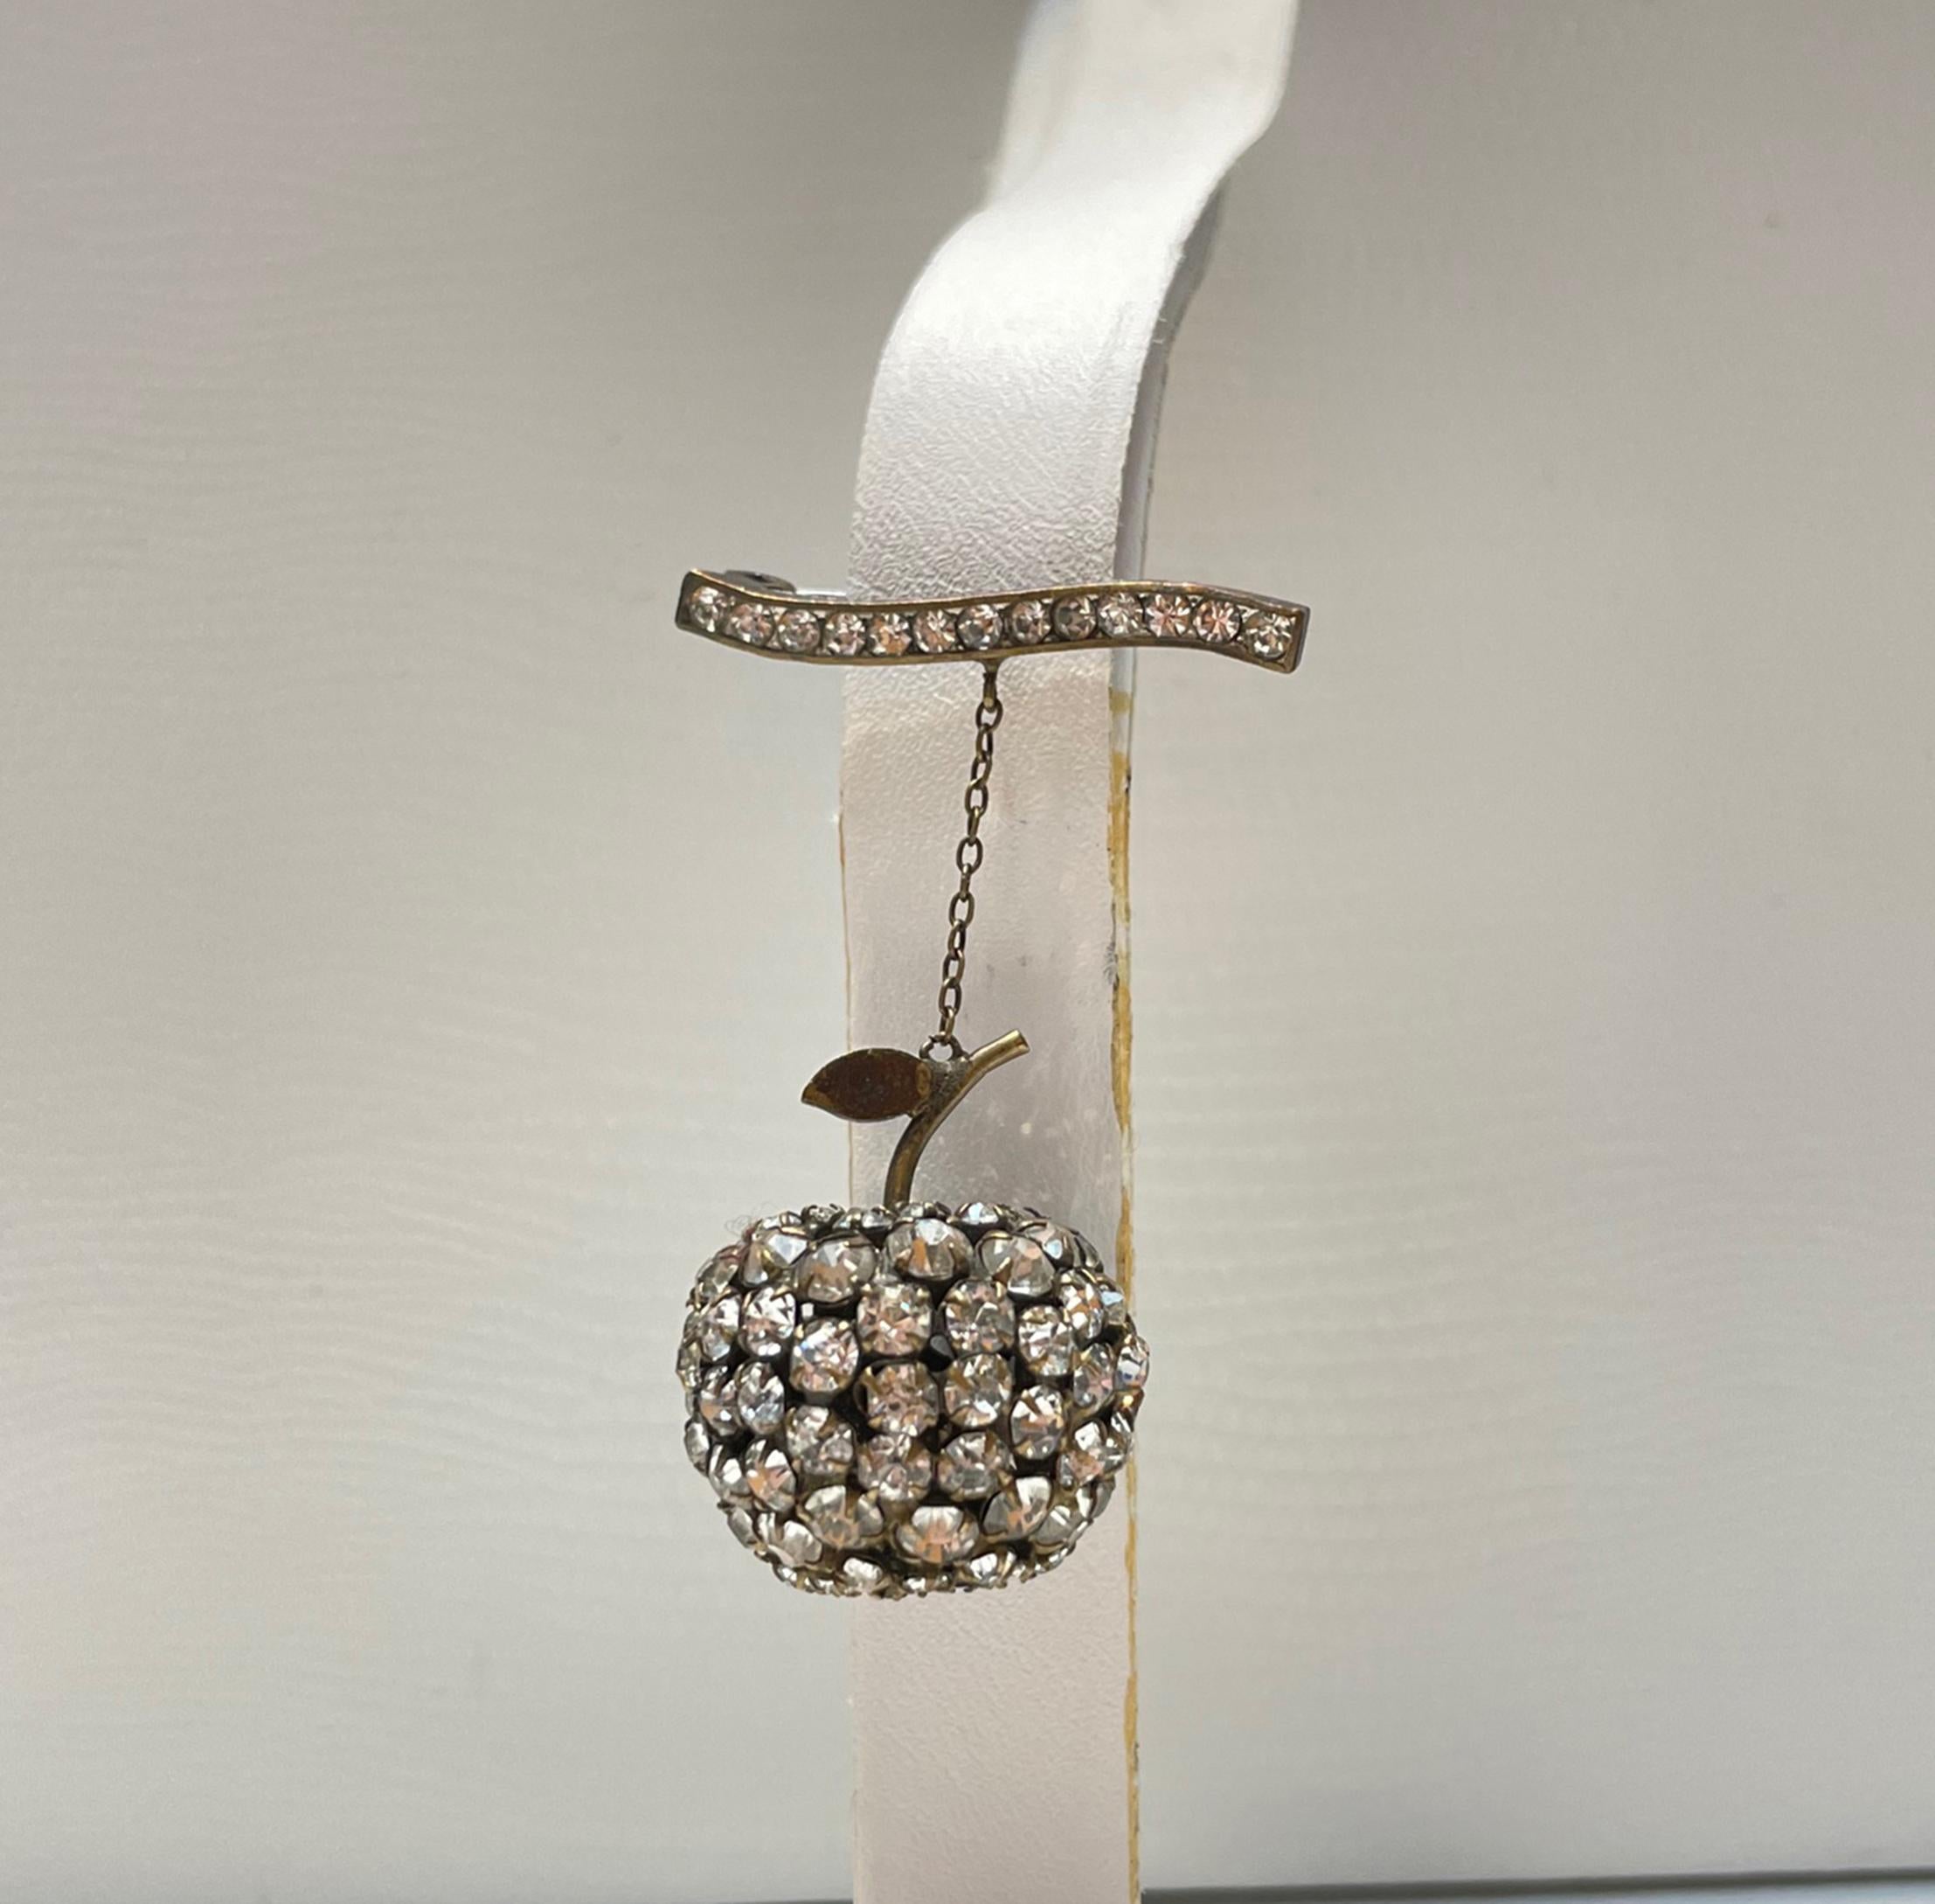 Beautifully designed Art Deco Brooch featuring an Apple encrusted with Sparkling Crystals suspended from a Crystal encrusted Bar. Silver mounting. Measuring approx. 1.75” long. More Beautiful in real time...Chic and sure to be admired complement to